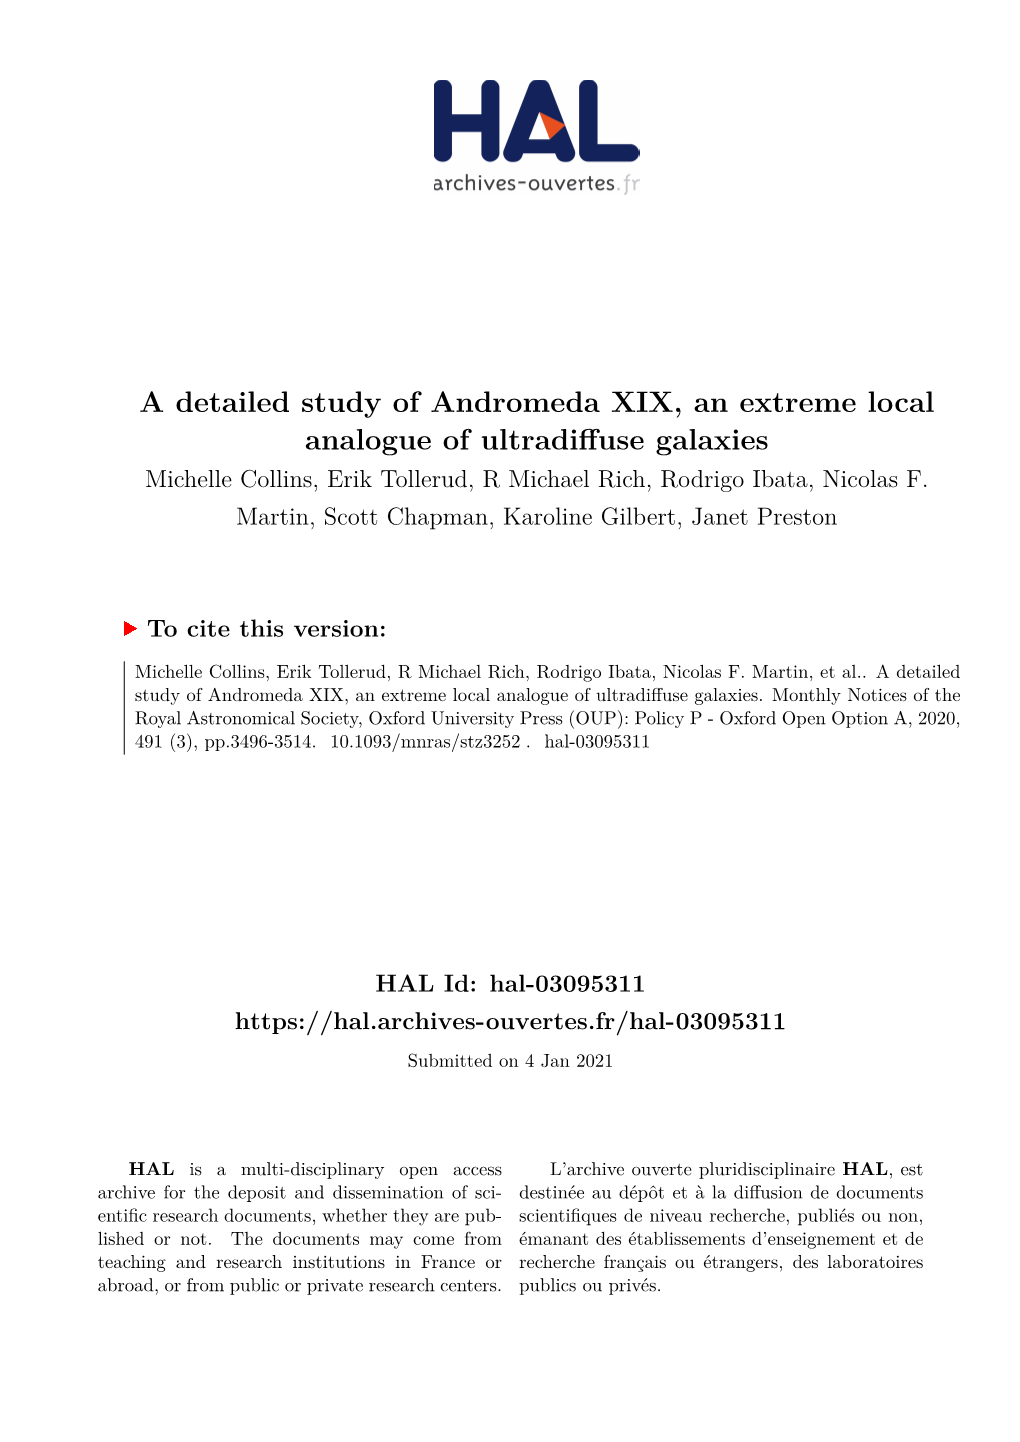 A Detailed Study of Andromeda XIX, an Extreme Local Analogue of Ultradiffuse Galaxies Michelle Collins, Erik Tollerud, R Michael Rich, Rodrigo Ibata, Nicolas F